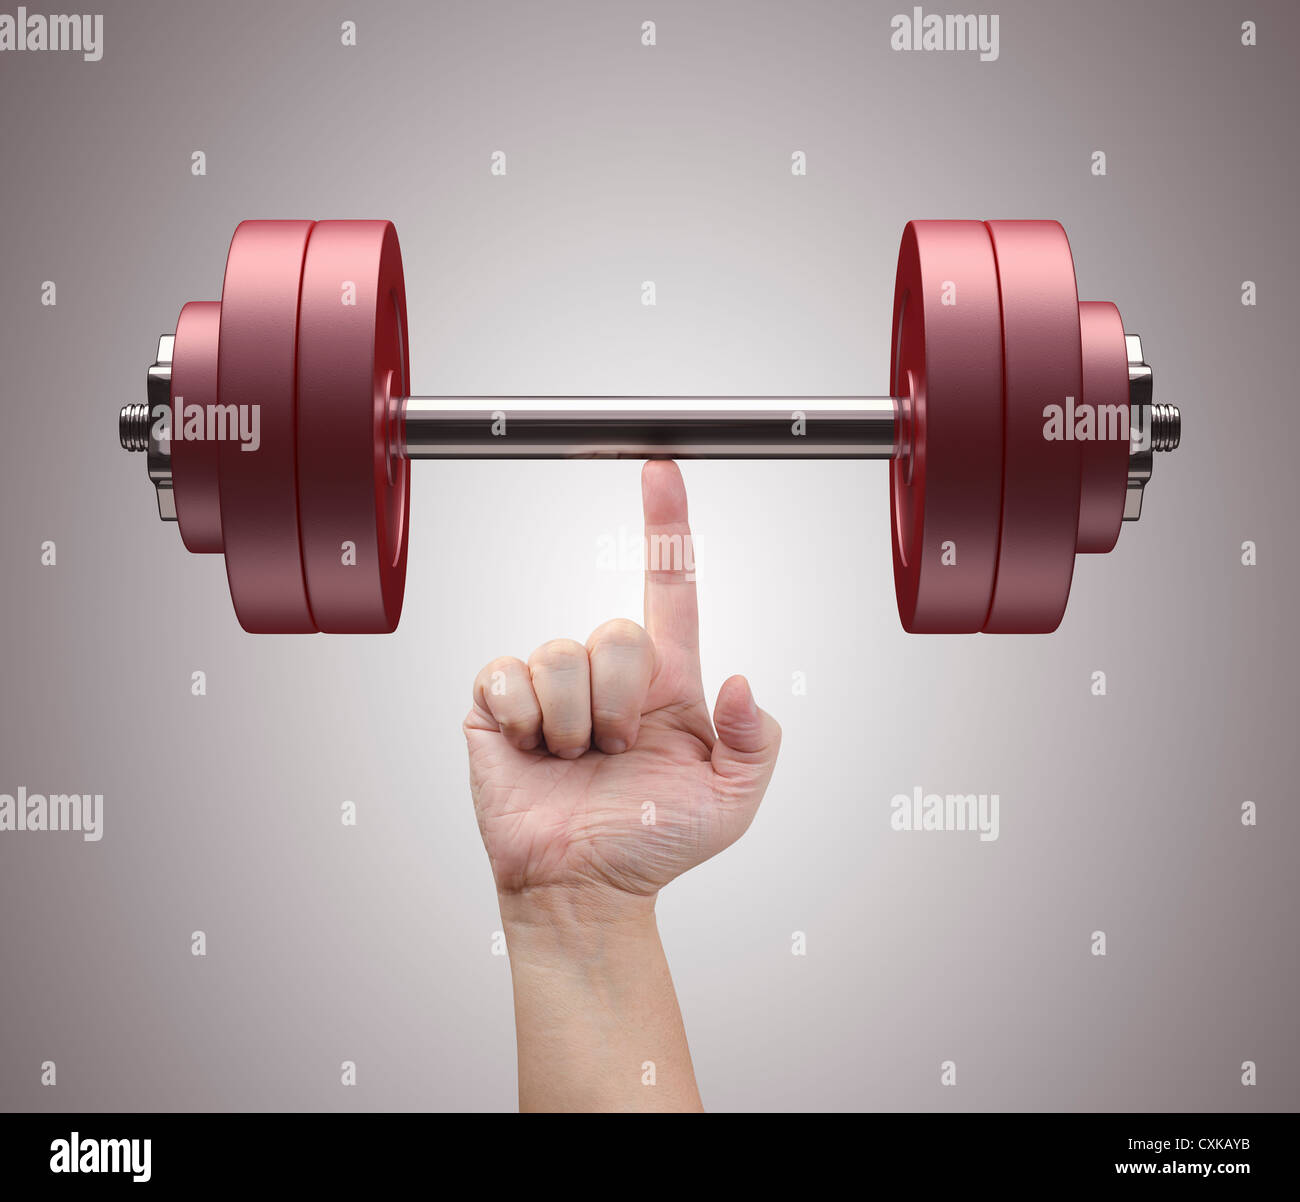 Weight lifting with just one finger. Concept of strength and training. Stock Photo